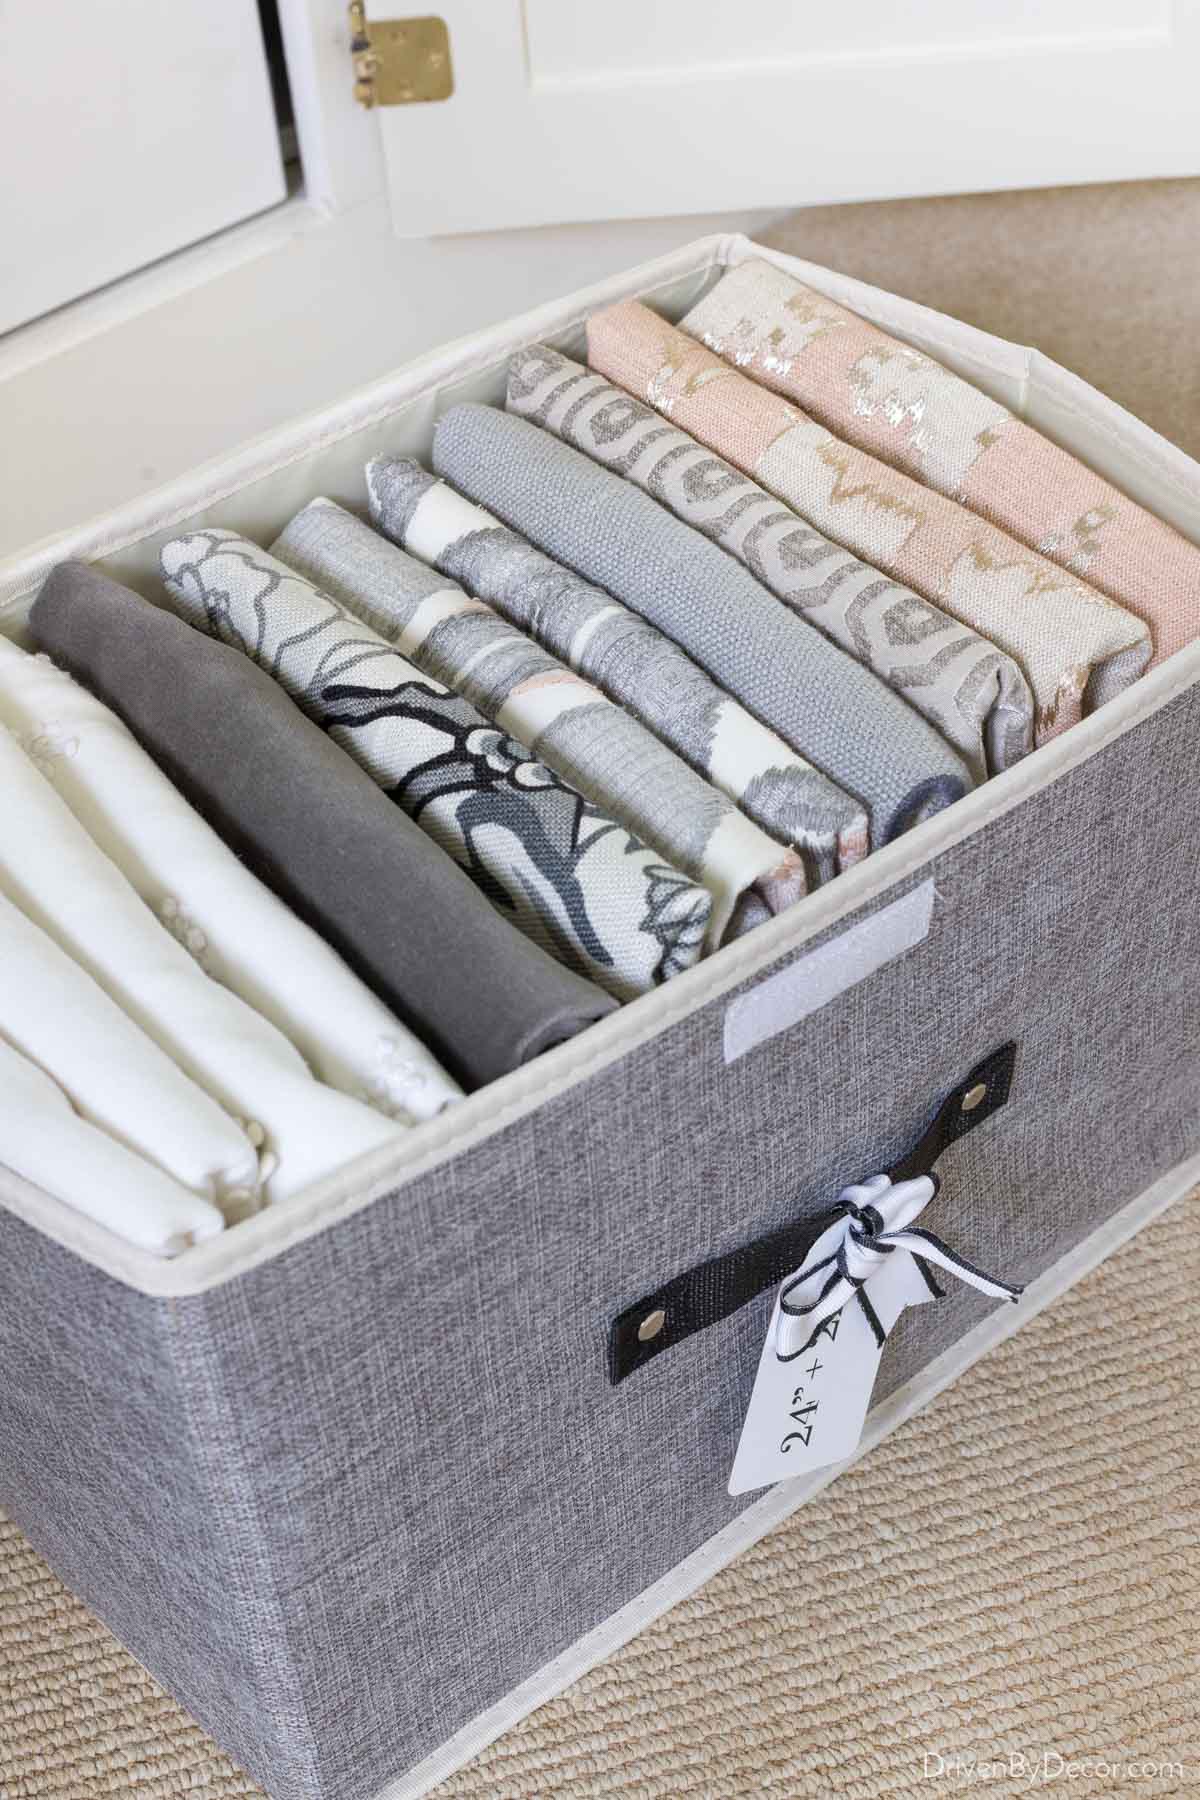 Pillow covers folded and stored in fabric storage box